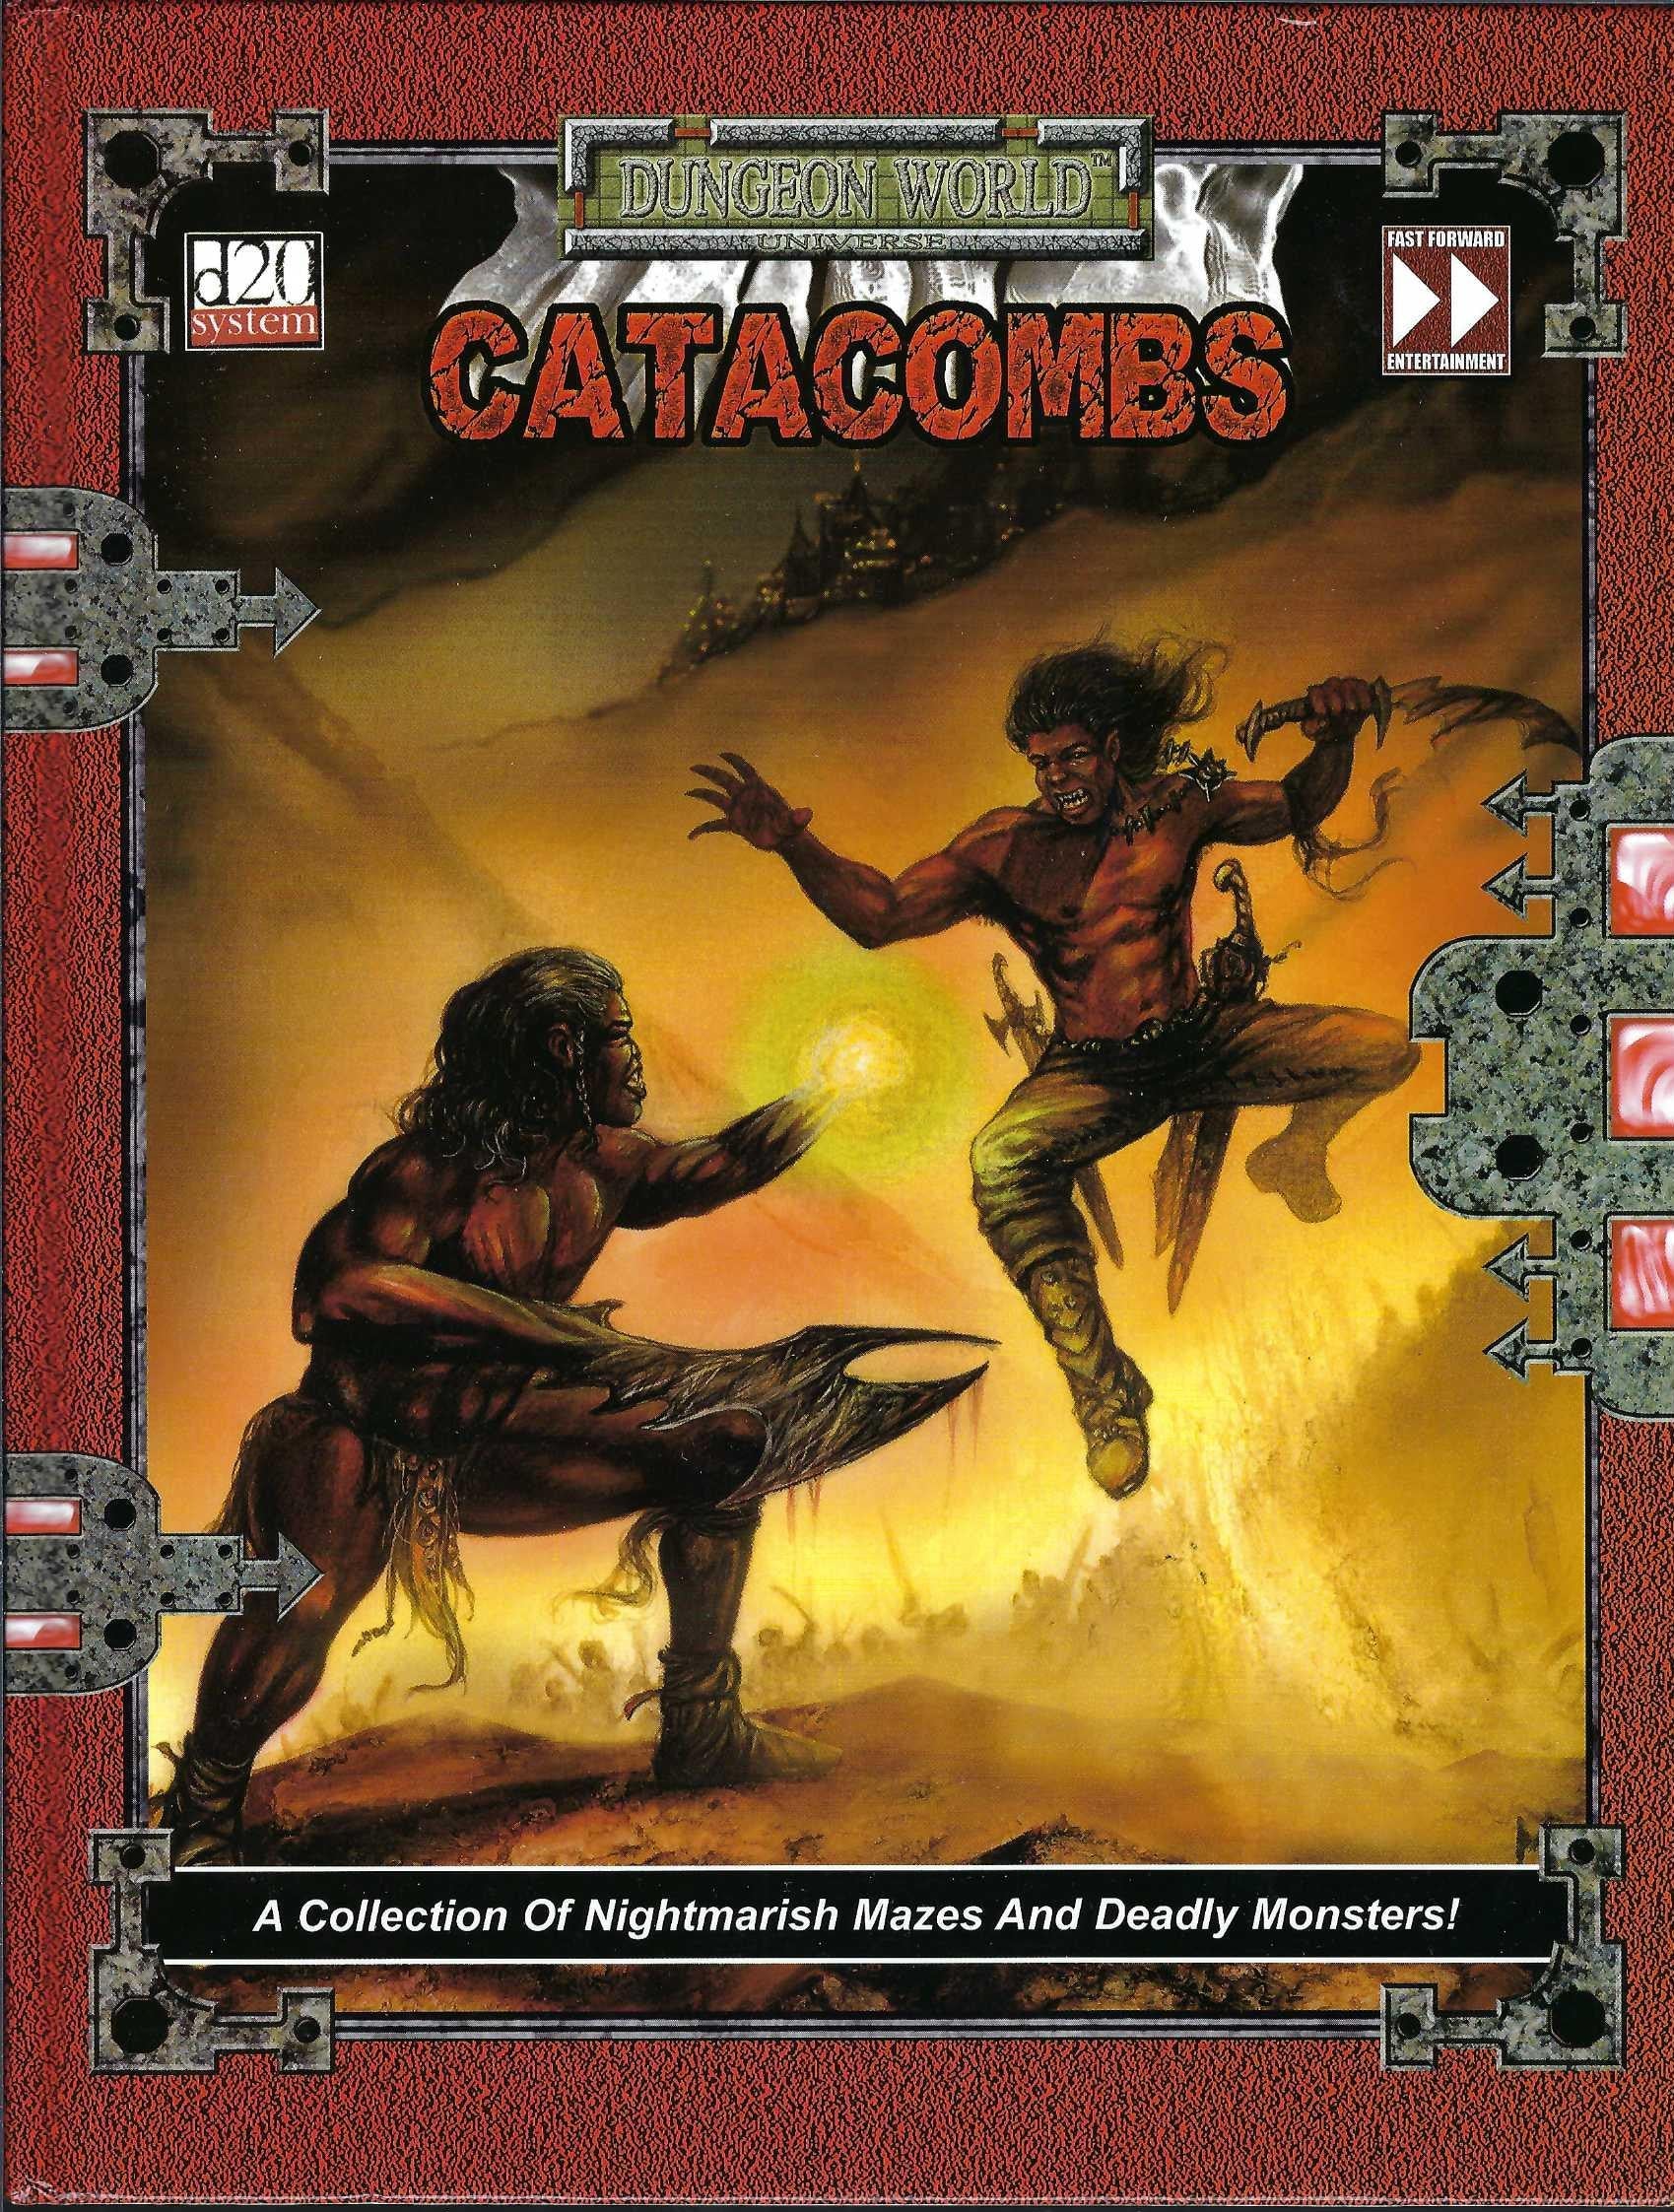 Dungeon World Catacombs cover